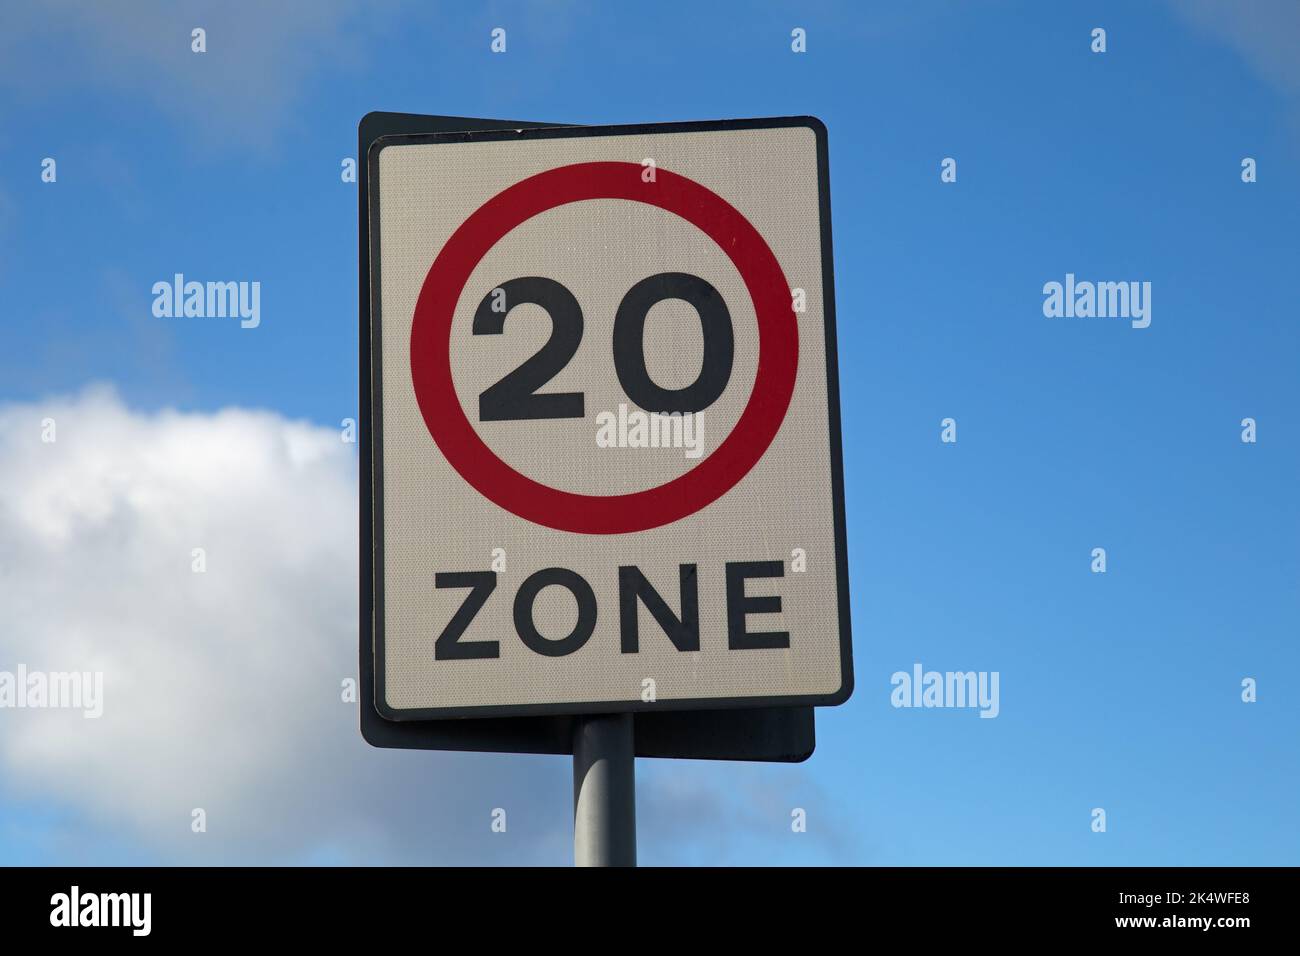 20 Miles per hour speed limit sign against a blue sky Stock Photo